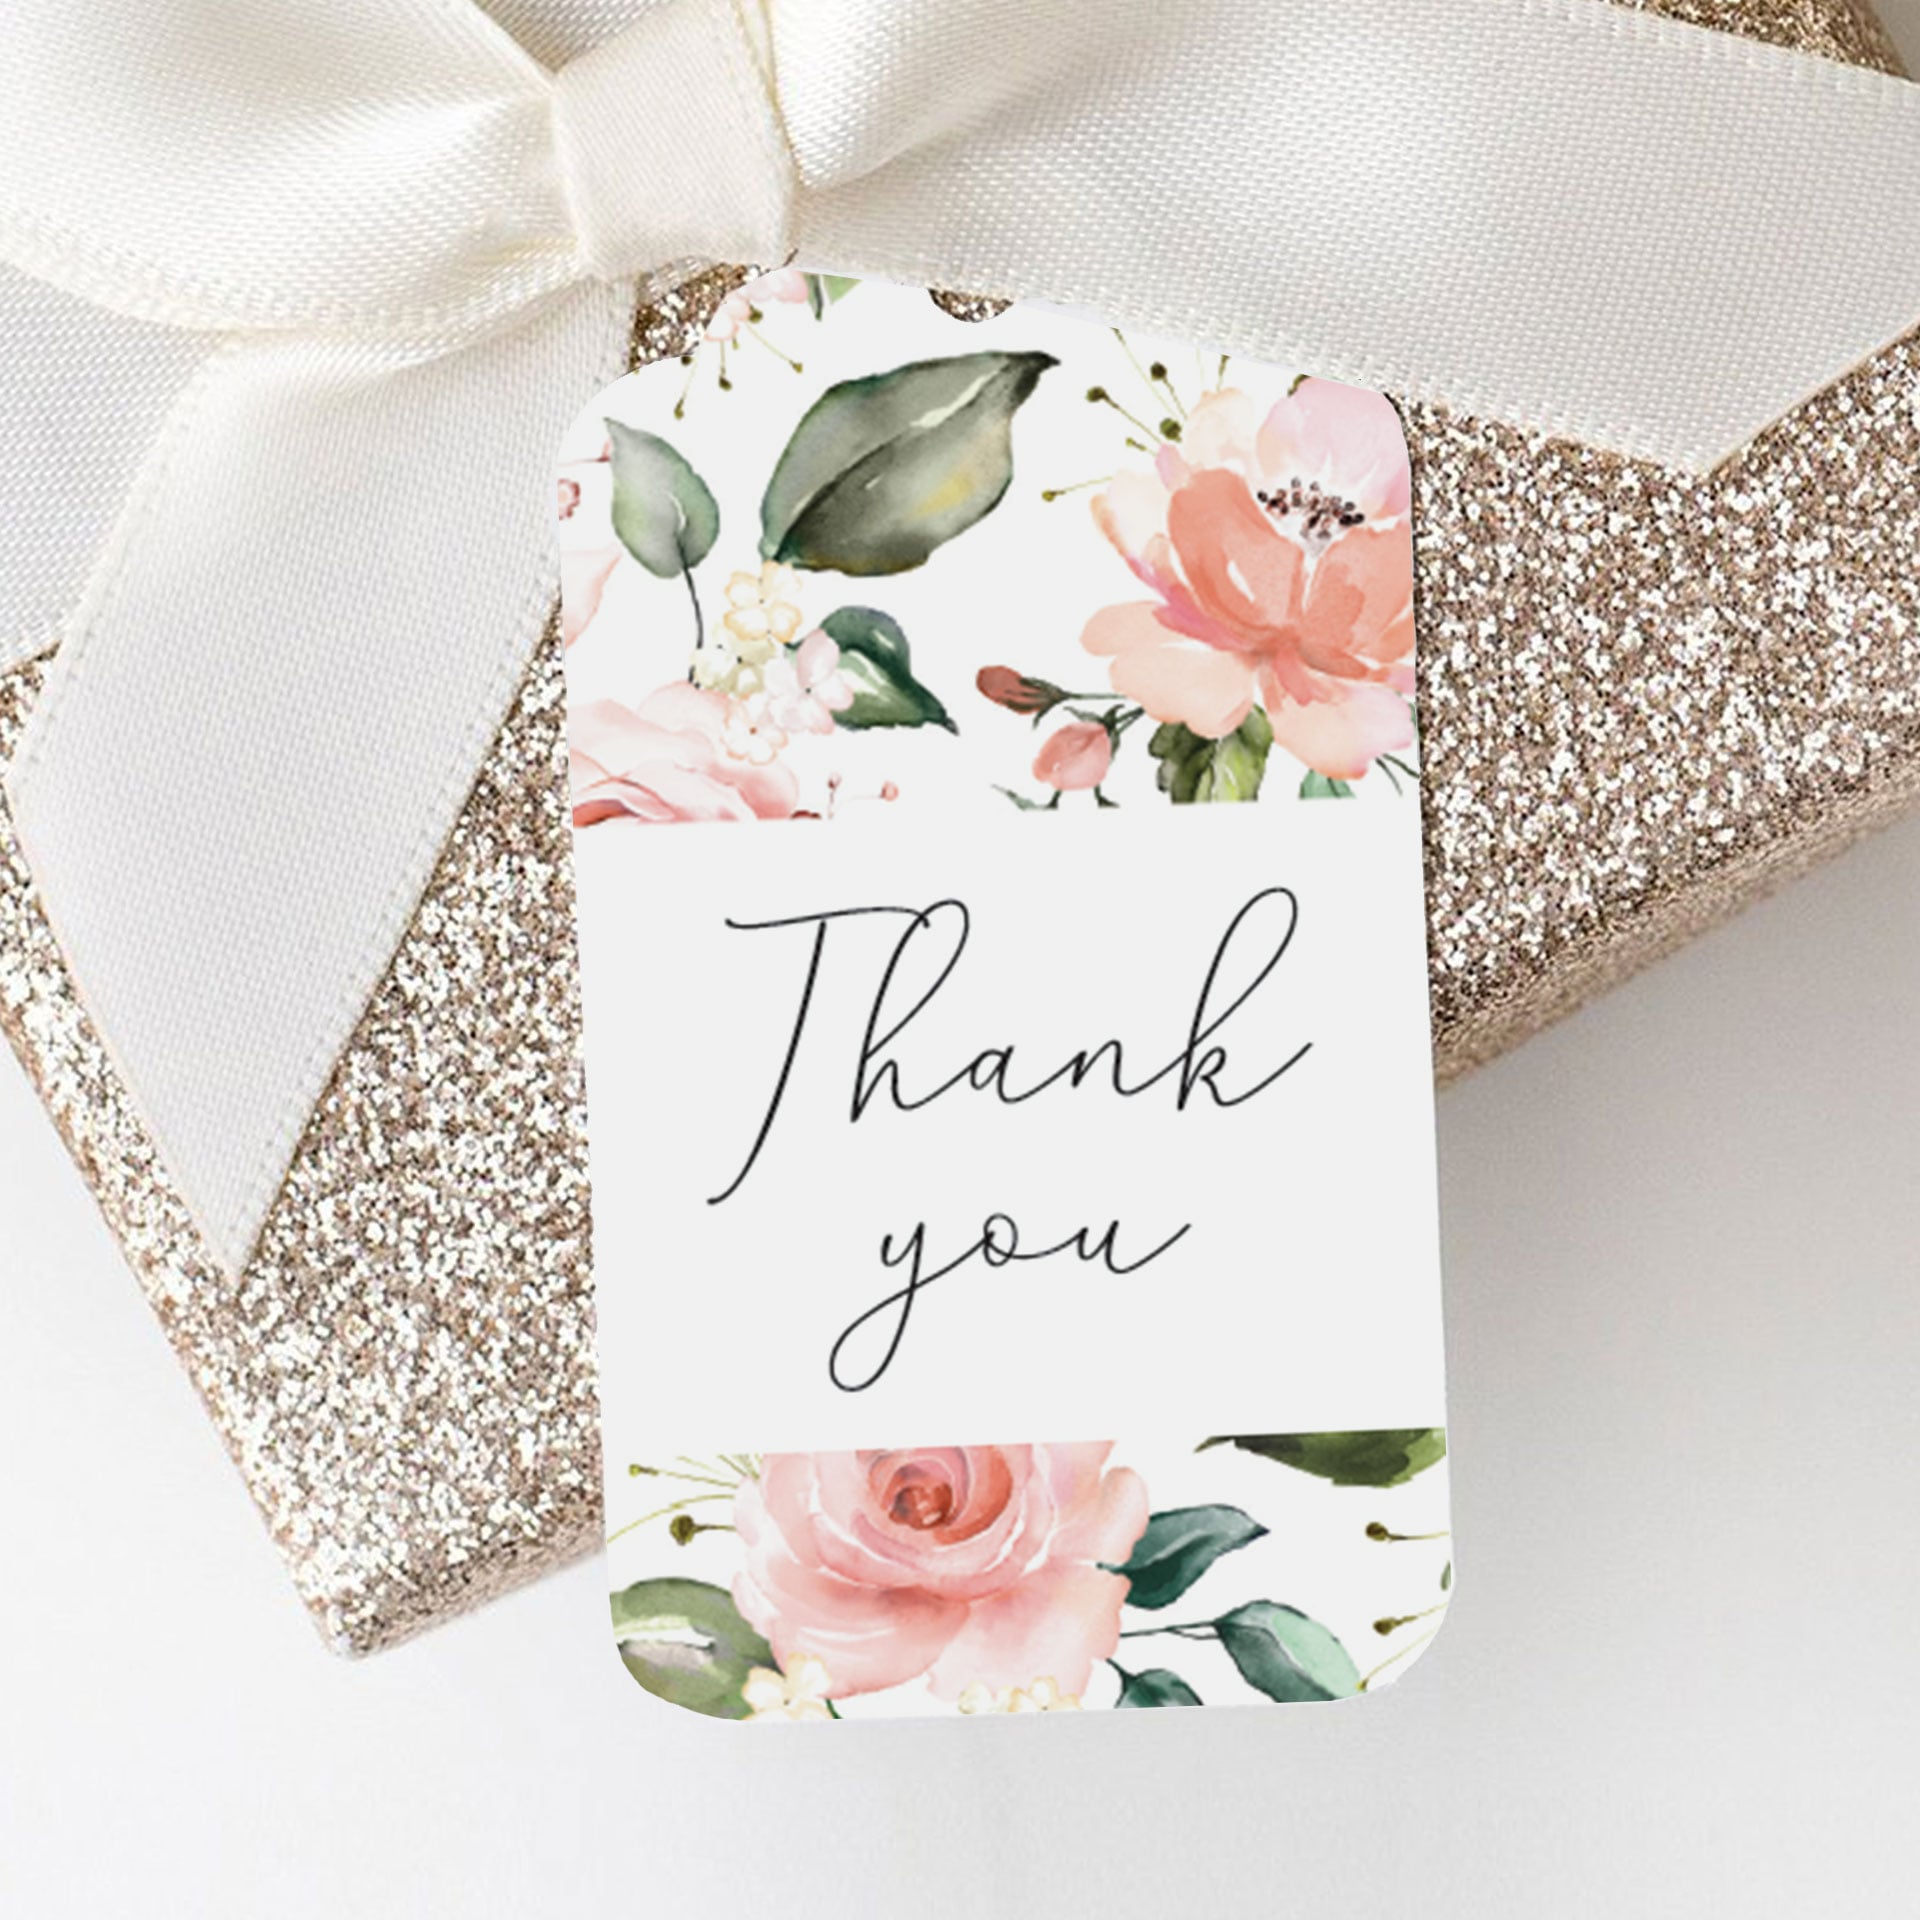 Thank you tags printables with blush flowers by LittleSizzle